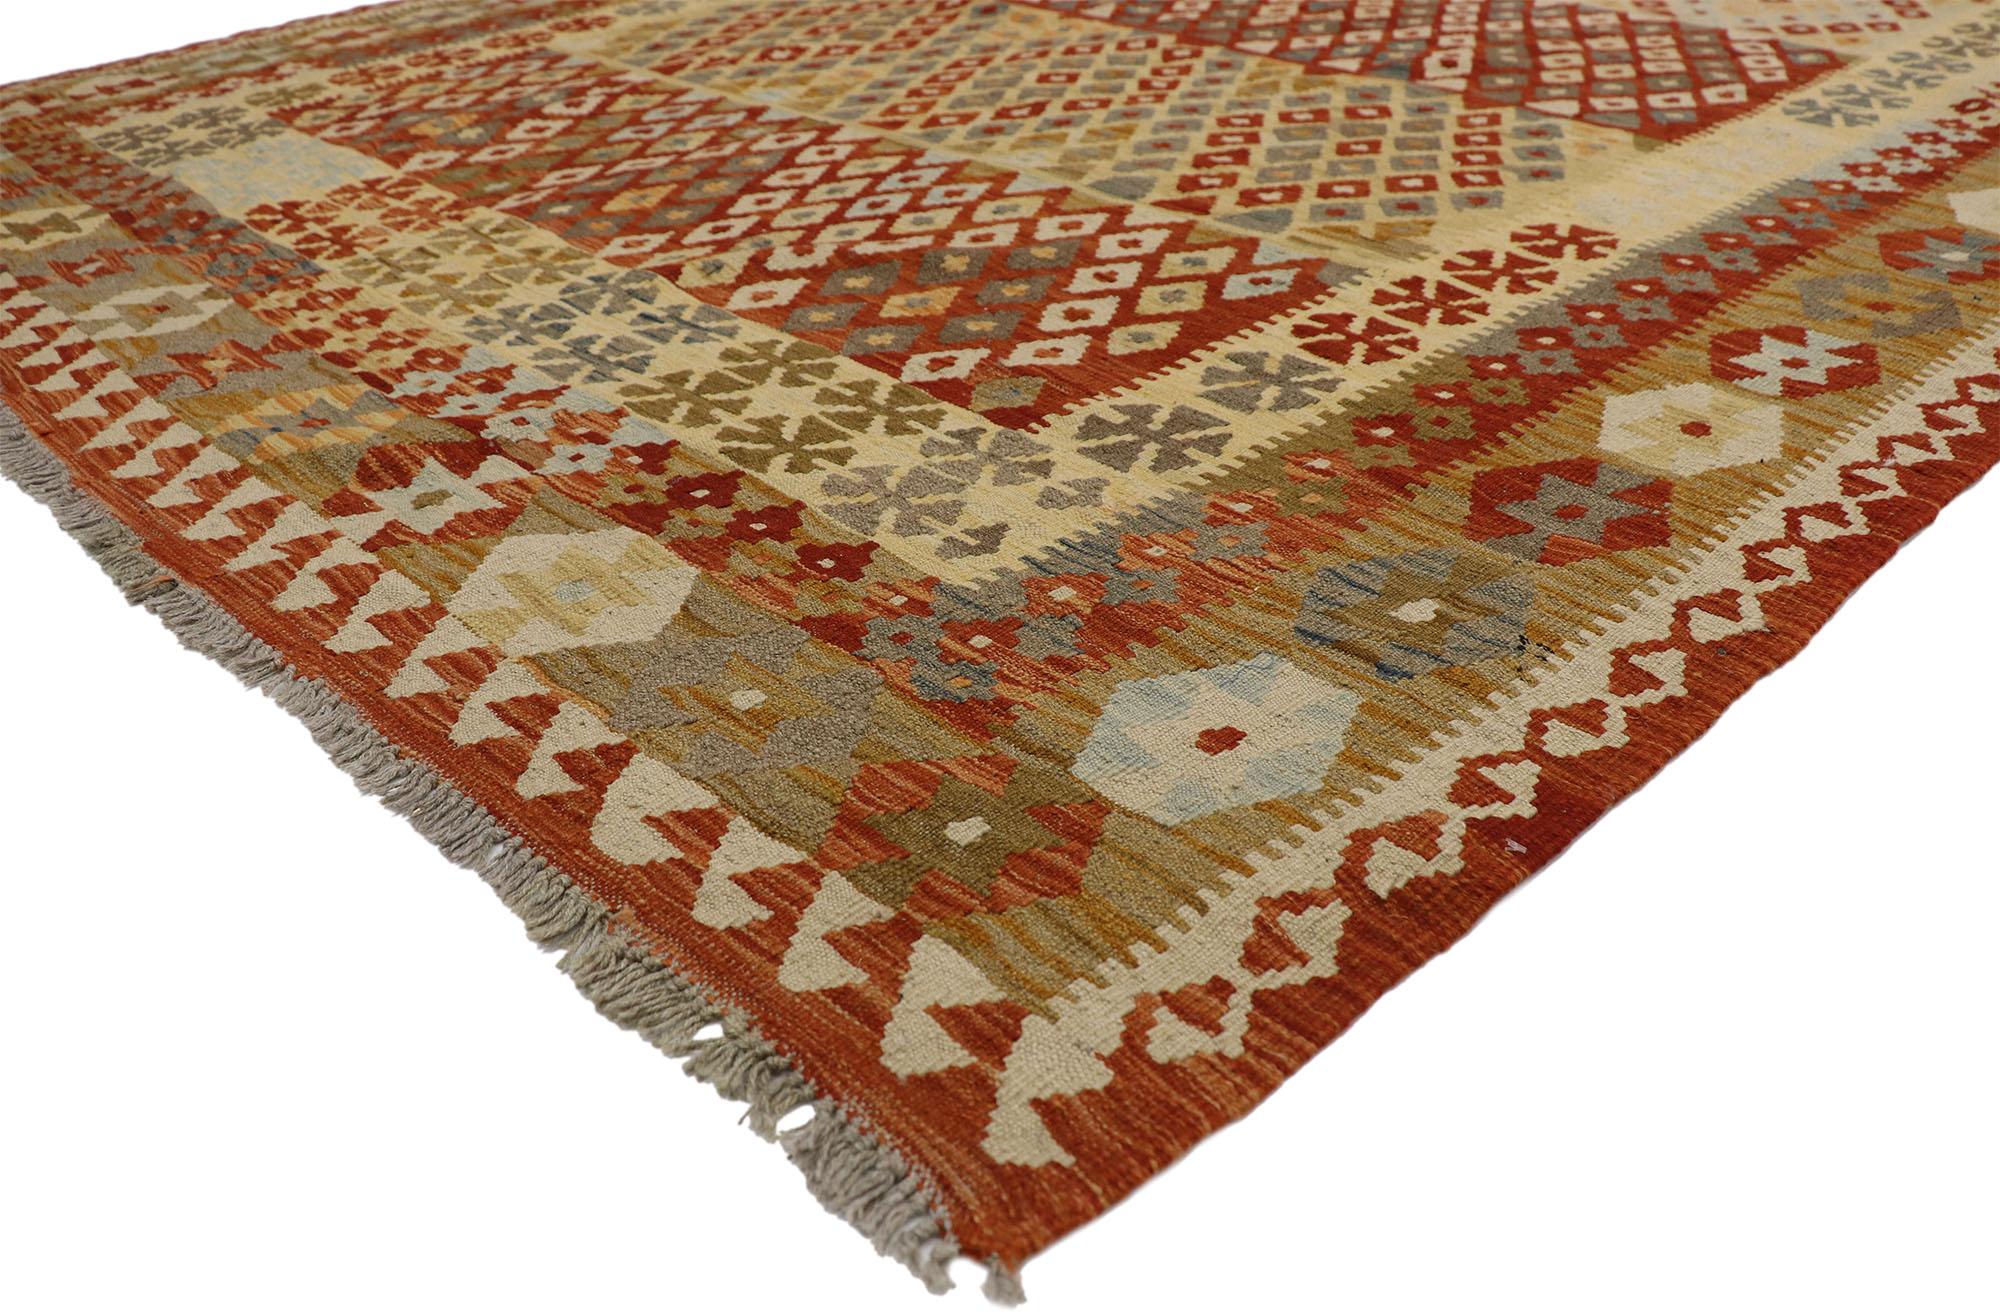 80160 Vintage Afghani Kilim Rug, 06’08 x 09’05. In this handwoven wool vintage Afghan kilim rug, Contemporary Santa Fe style merges seamlessly with tribal enchantment, offering a captivating design and culture. The rug's striking tribal motifs and